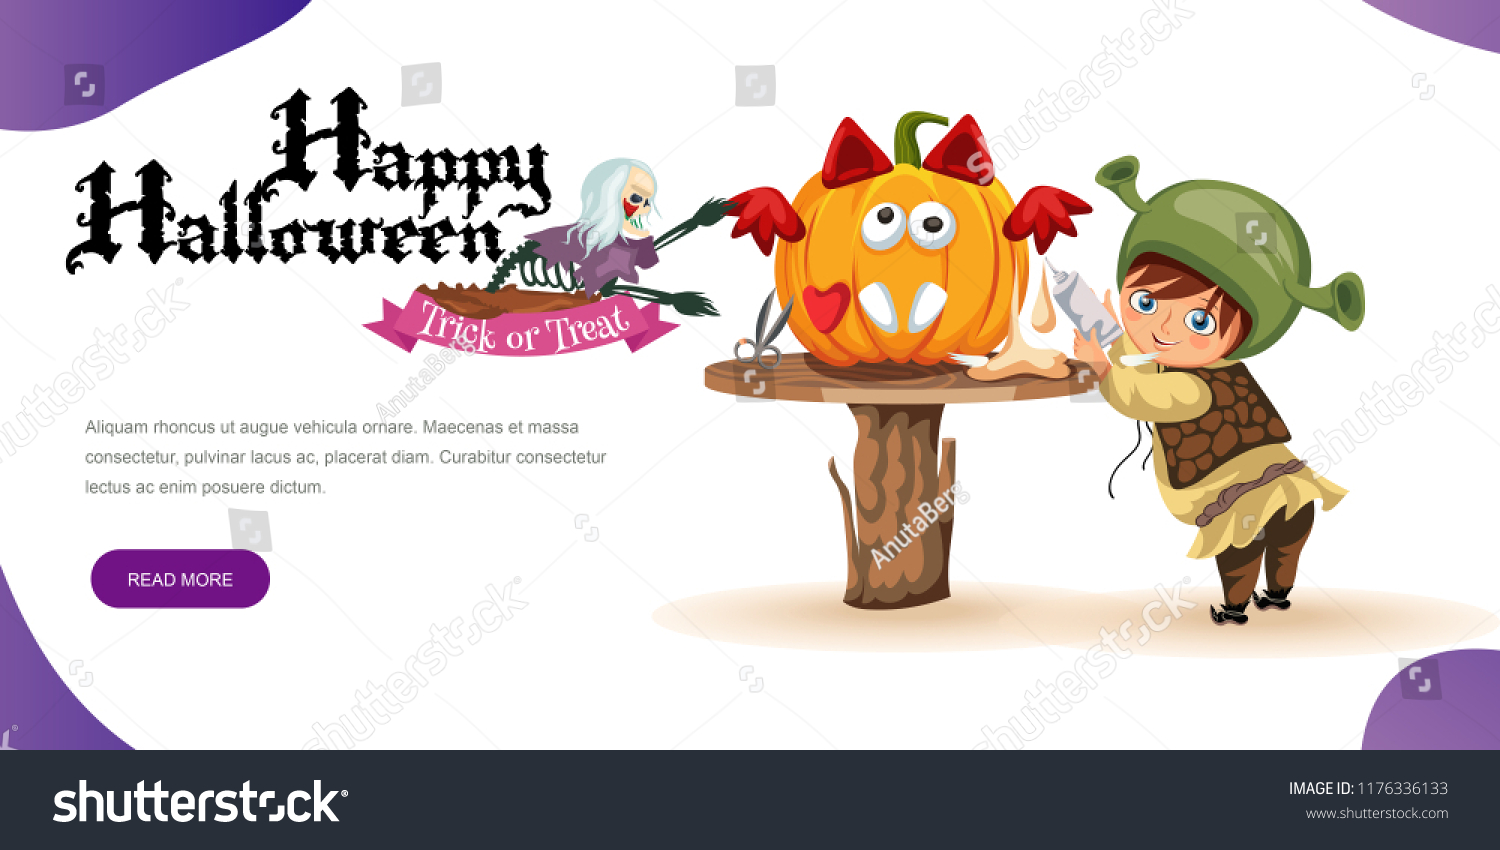 SVG of Cartoon little kid preparing for All Hallows Eve poster. child dressed in costume shrek carving Halloween pumpkin vector illustration template design with promo text elements in colorful background. svg